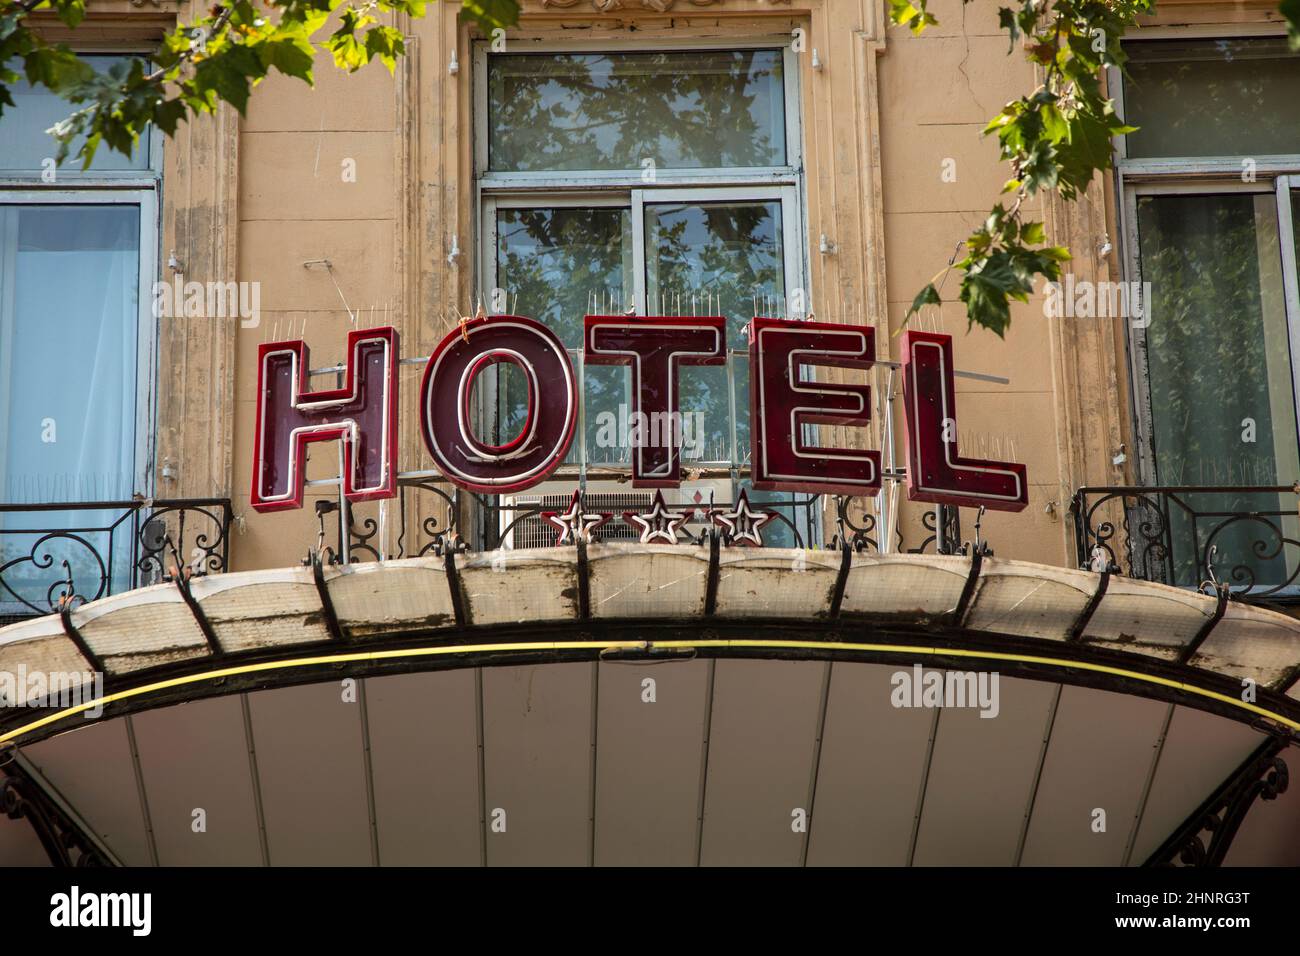 sign Hotel at an old facade in red letters in Aix en Provence Stock Photo